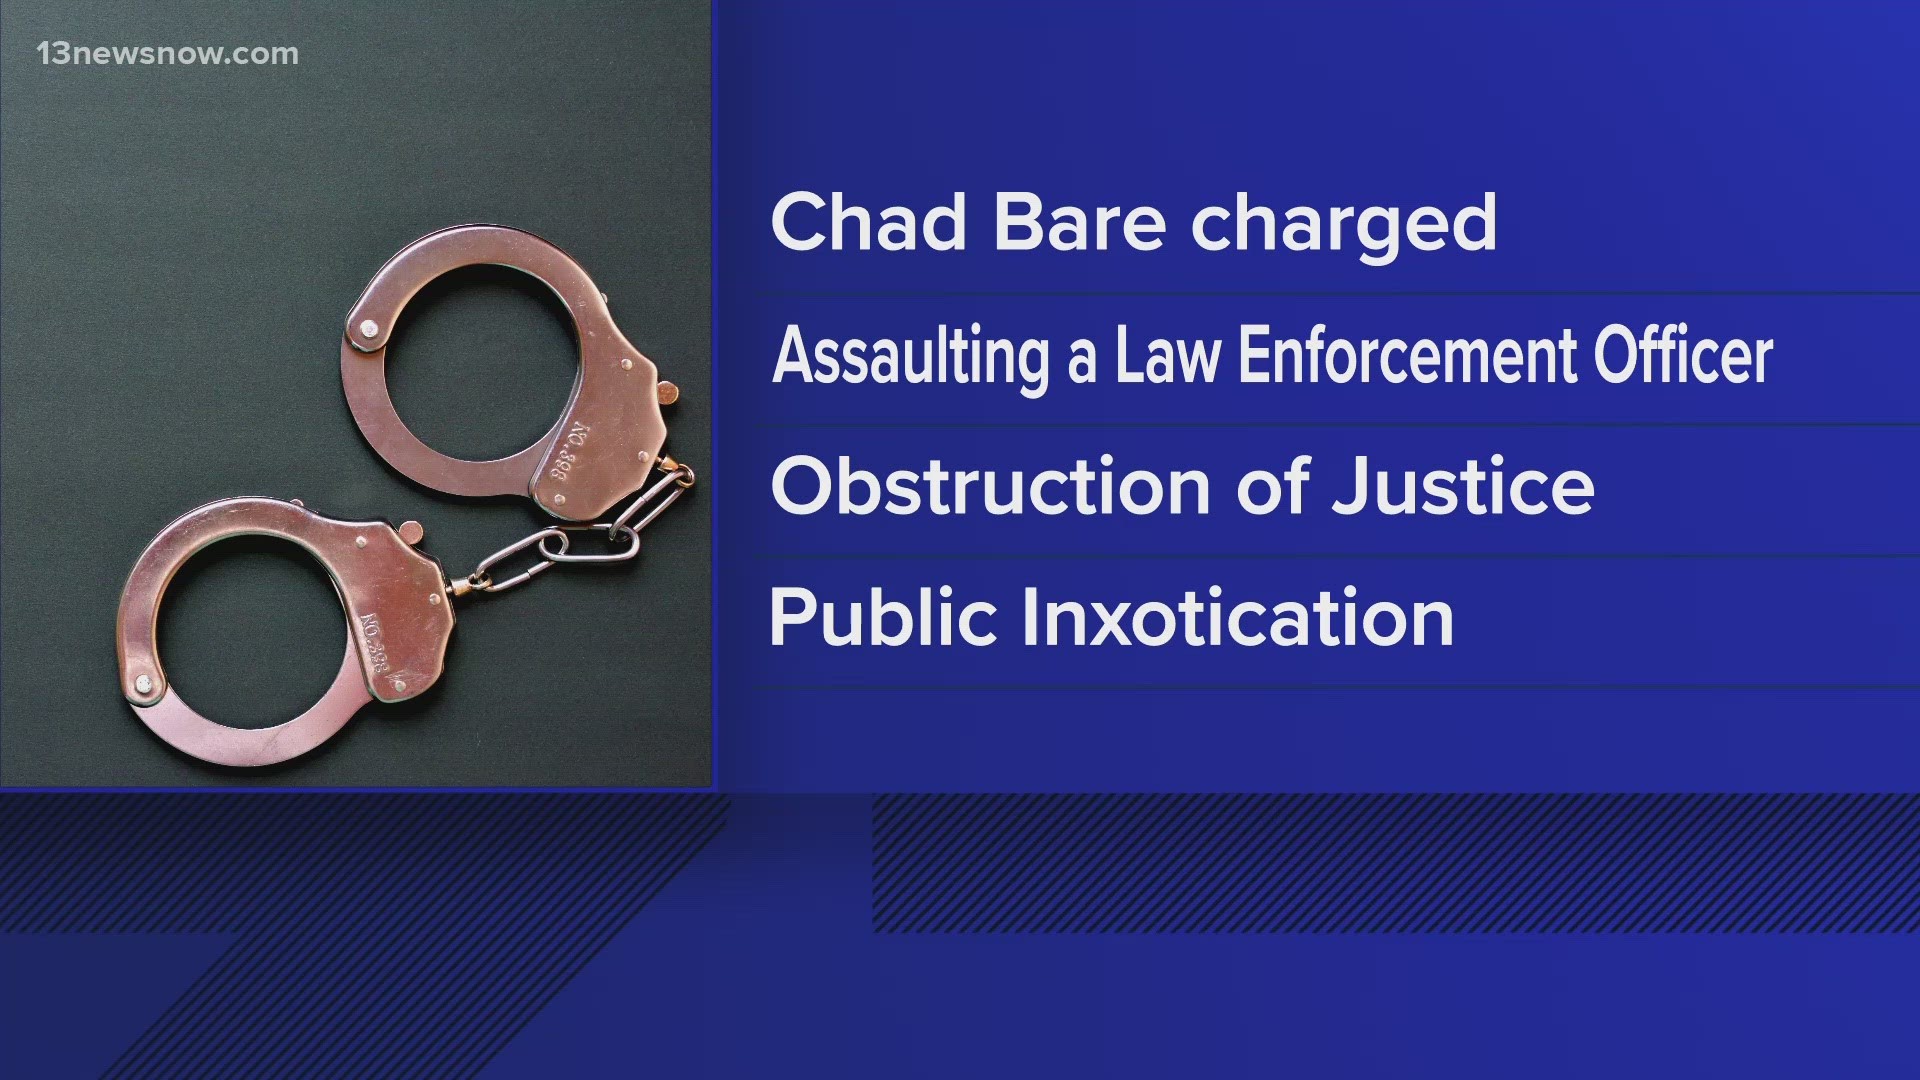 Virginia State Police confirm Chad Bare of Fredericksburg was arrested in Virginia Beach. He is currently suspended without pay.